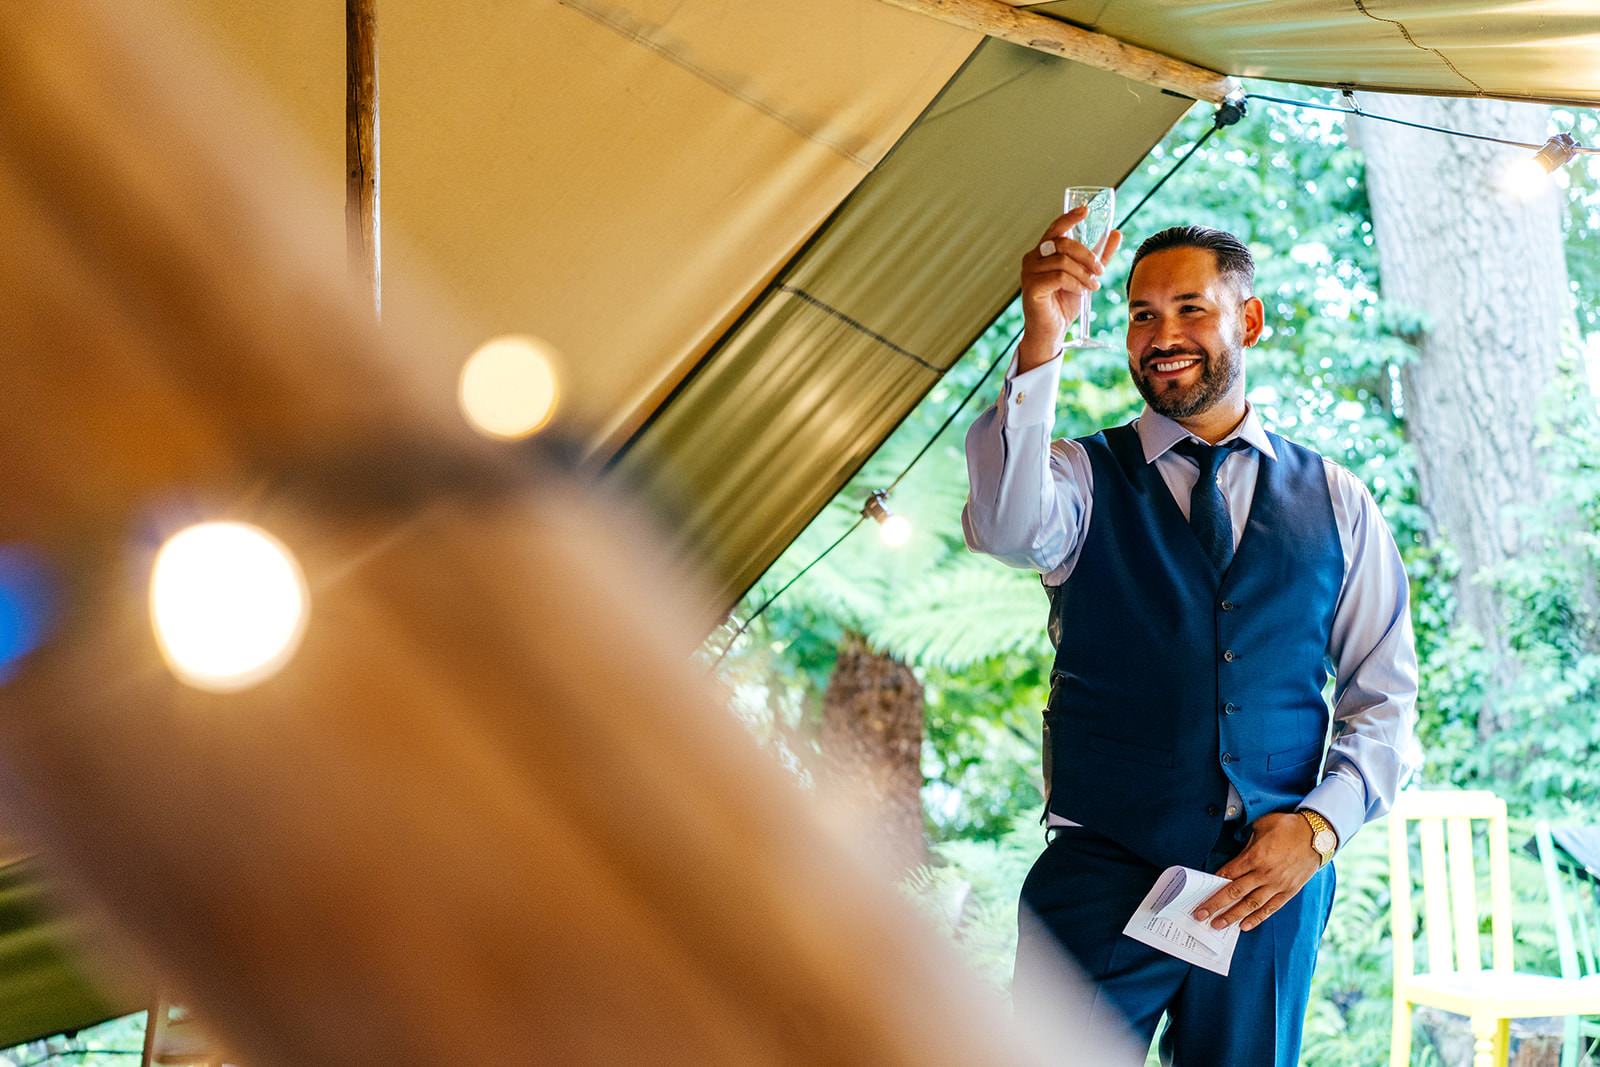 Brother toasts the Bride and Groom during heartfelt speech